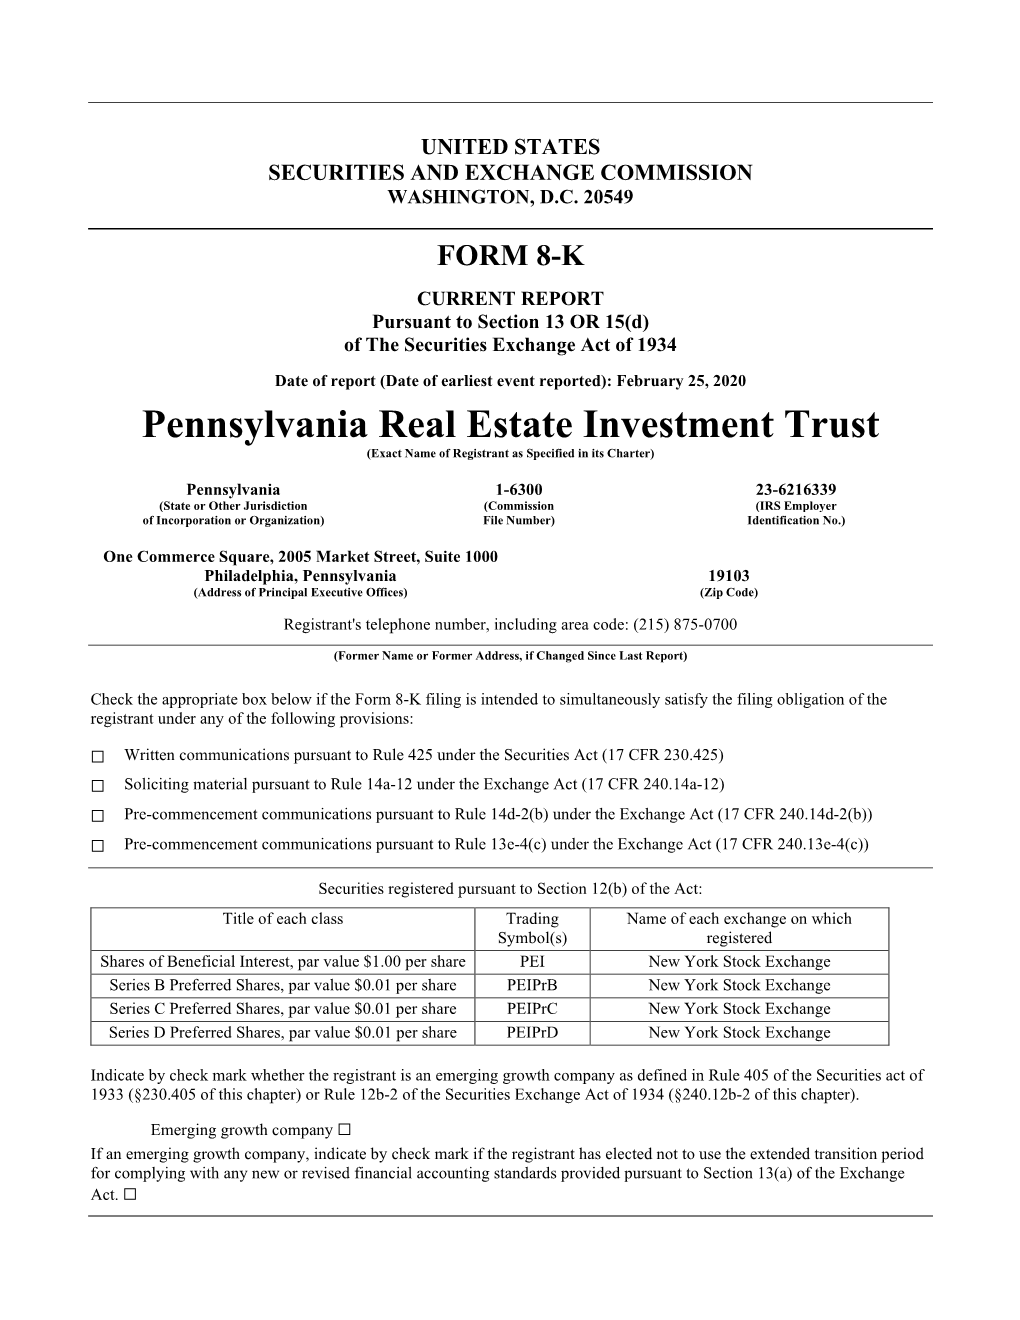 Pennsylvania Real Estate Investment Trust (Exact Name of Registrant As Specified in Its Charter)